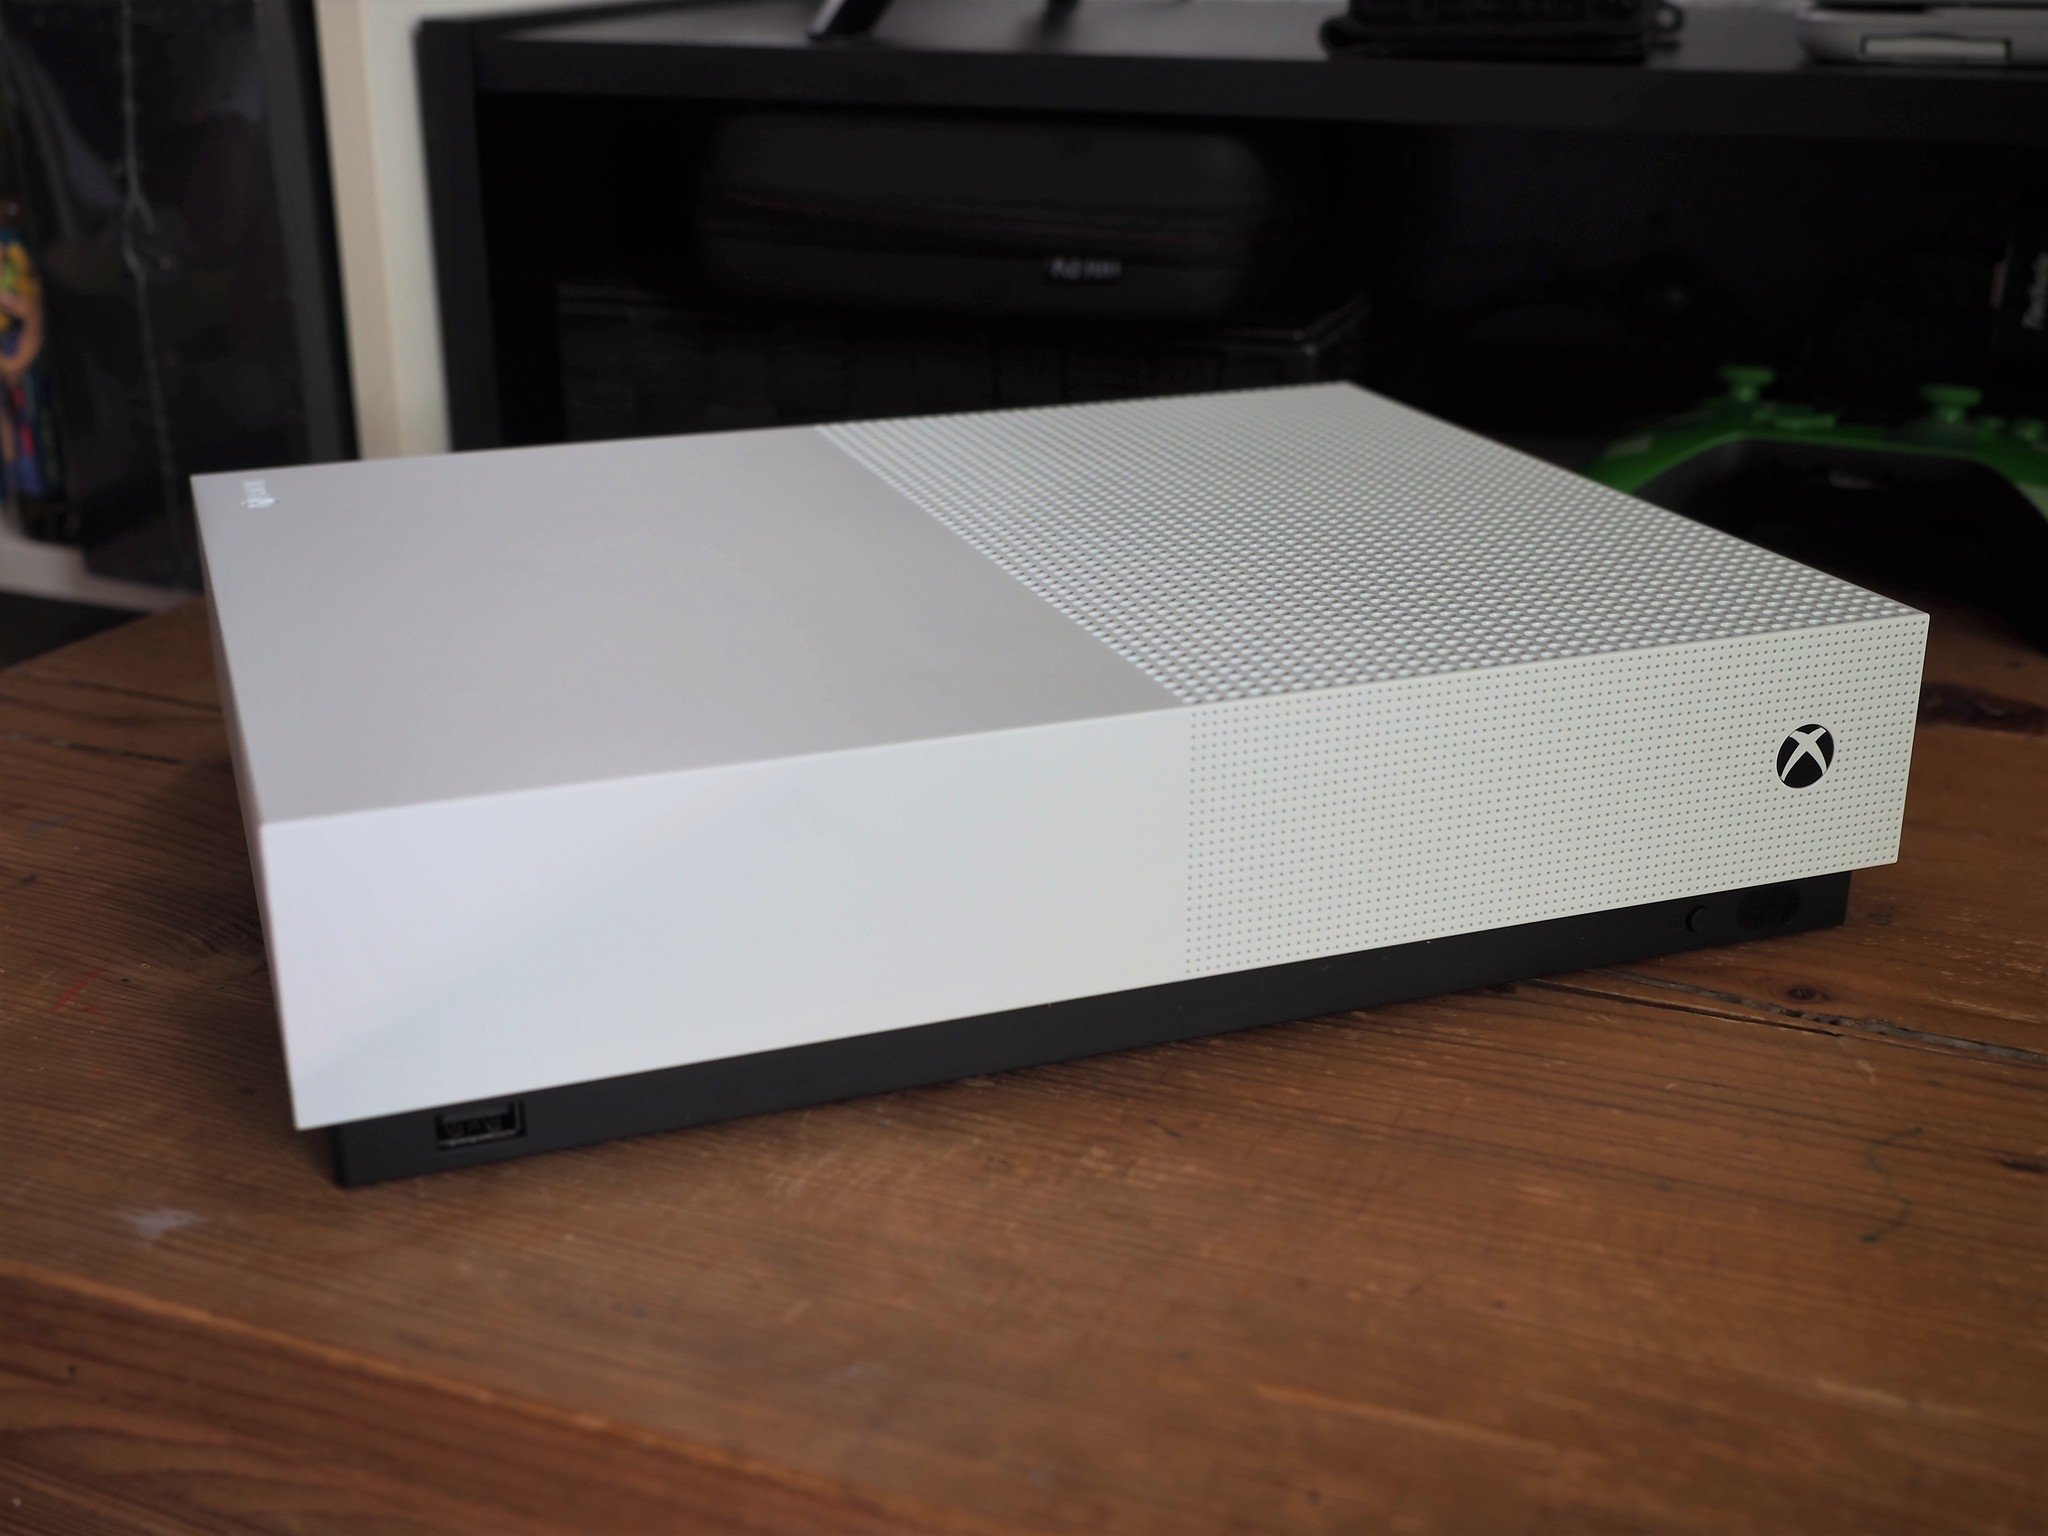 Microsoft Xbox One S All-Digital Edition Review